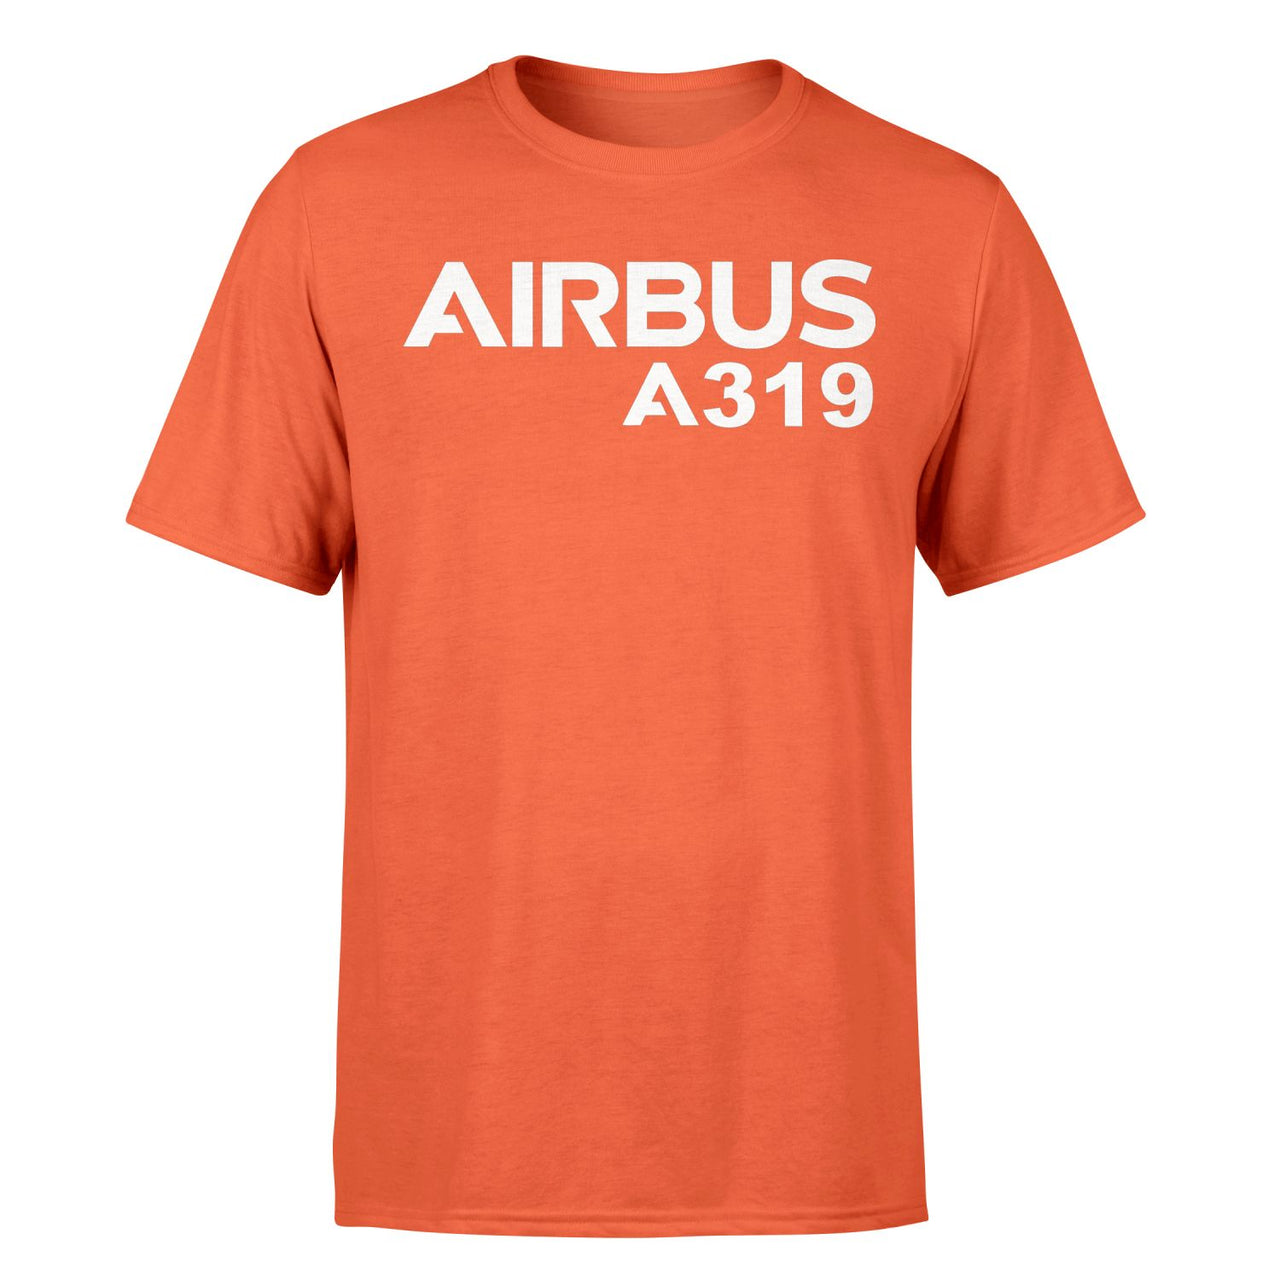 Airbus A319 & Text Designed T-Shirts